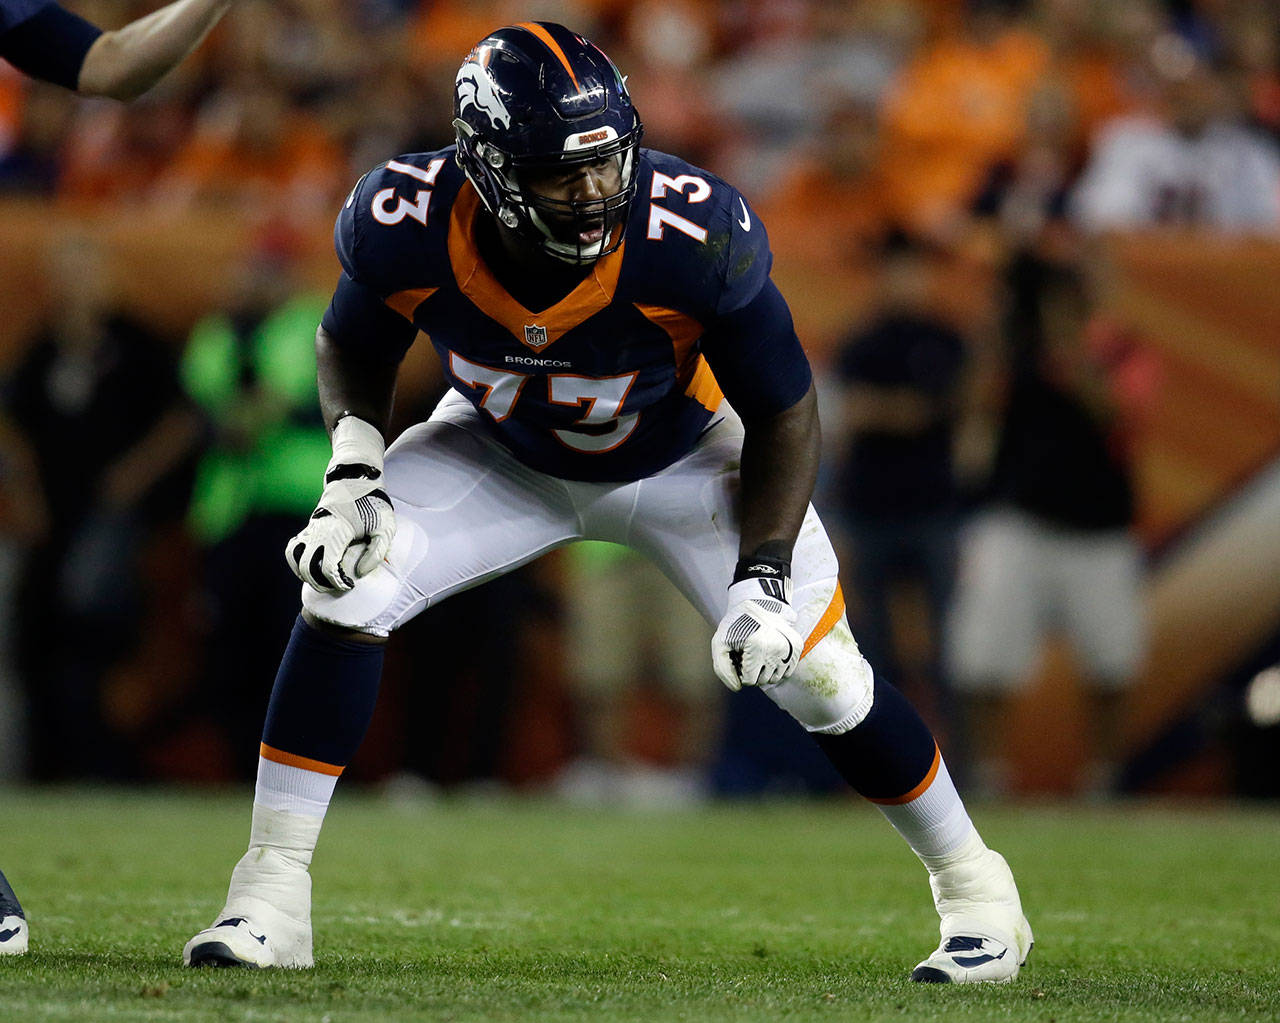 Broncos offensive tackle Russell Okung, a former Seahawk, is expected to discuss a return to Seattle when free agency opens on Thursday. (AP Photo/Jack Dempsey)